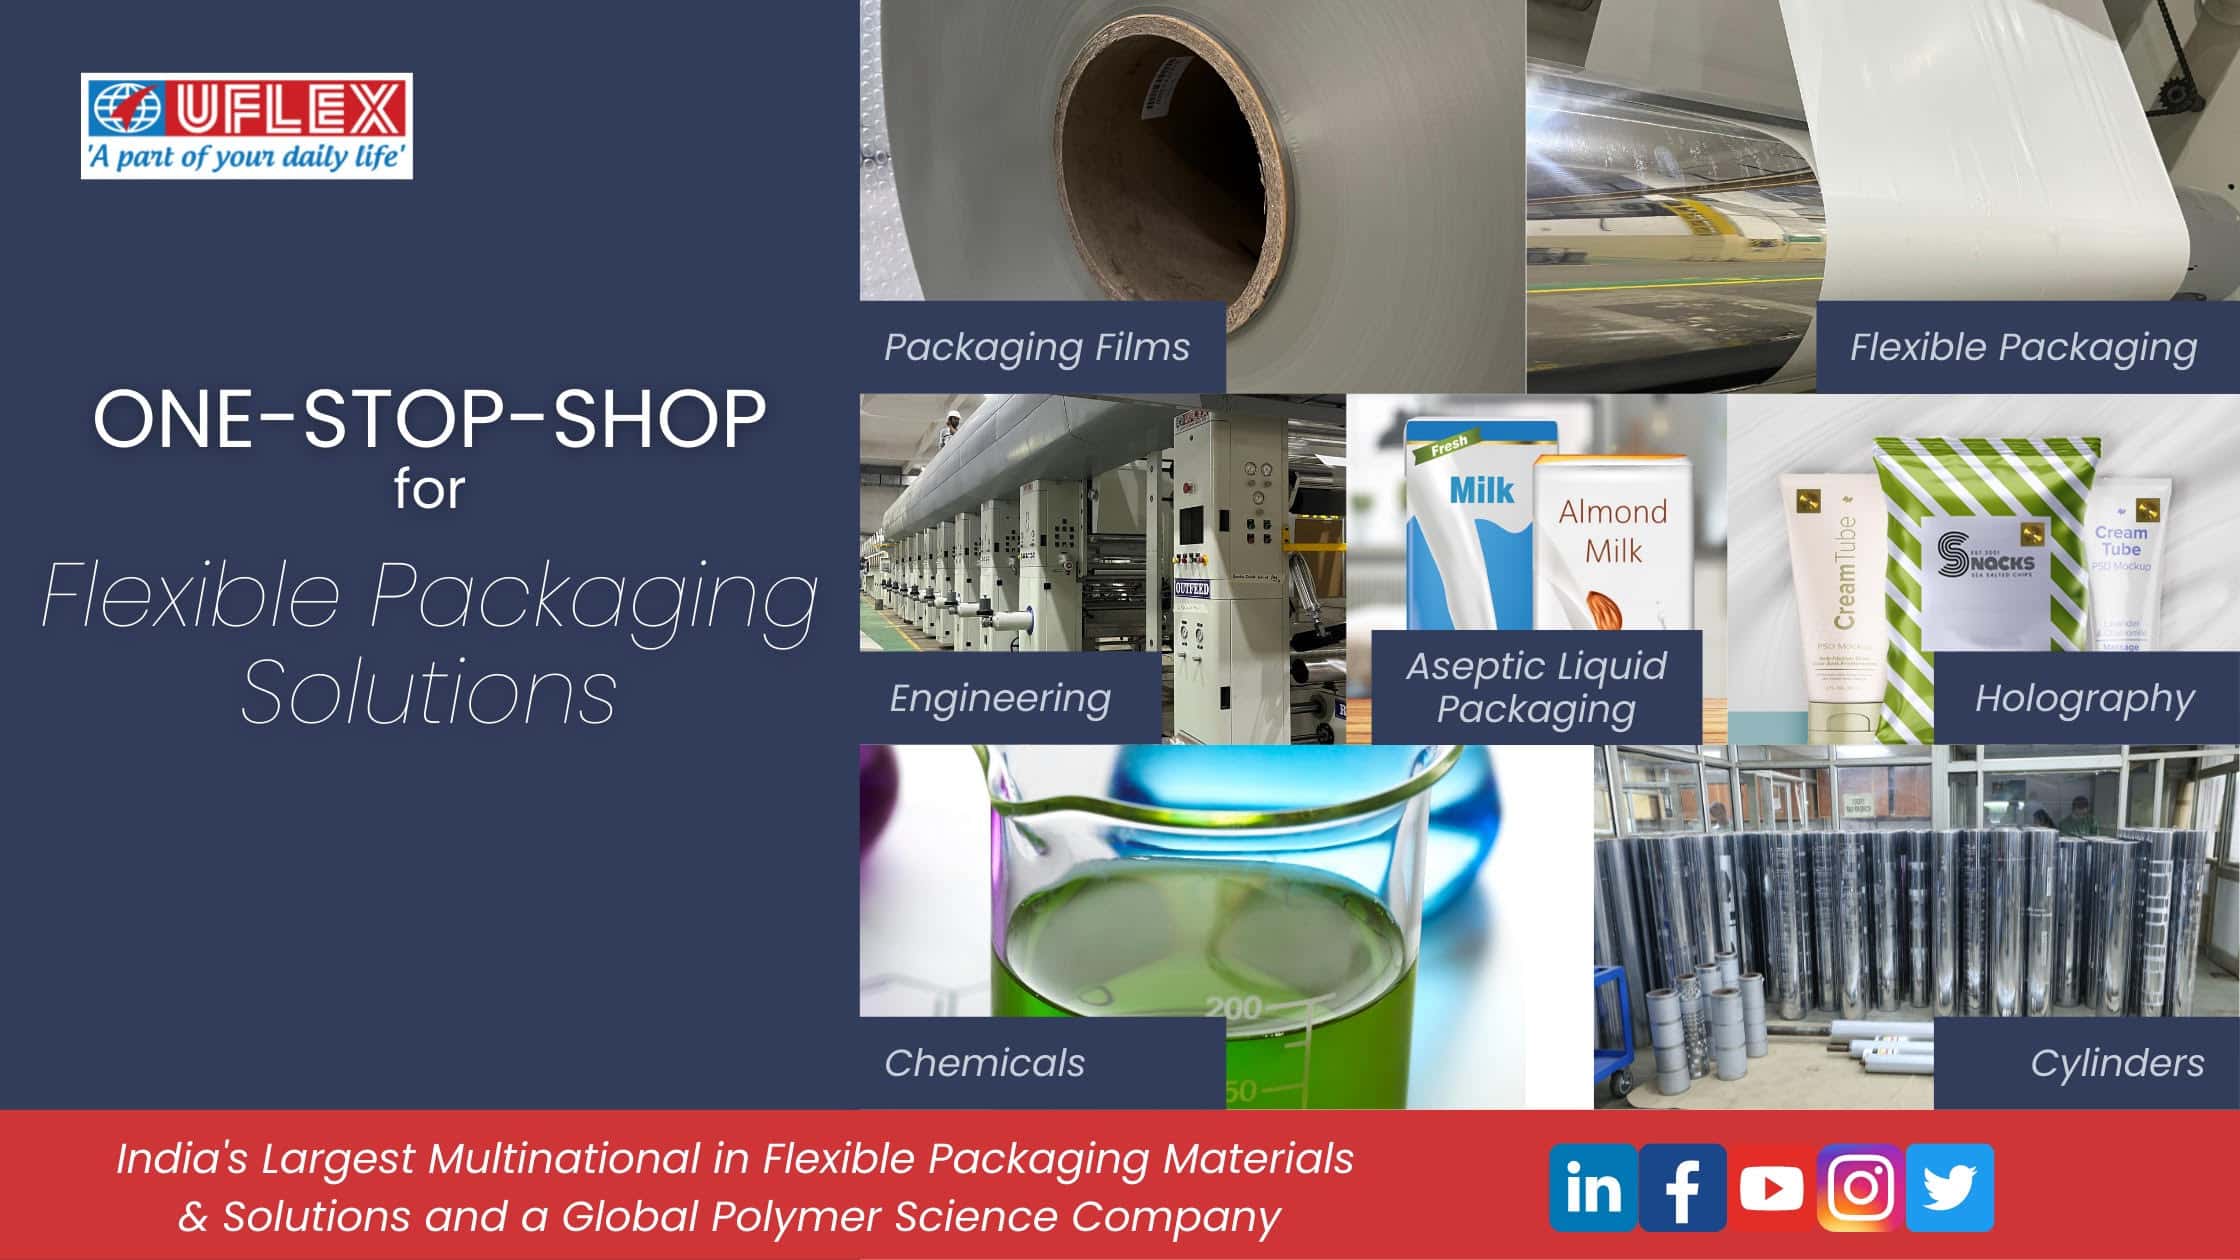 FLEXIBLE PACKAGING MAJOR UFLEX DISPLAYING UNMATCHED TECHNOLOGY and INNOVATION AT PACK PLUS SOUTH 2016, HYDERABAD (INDIA)